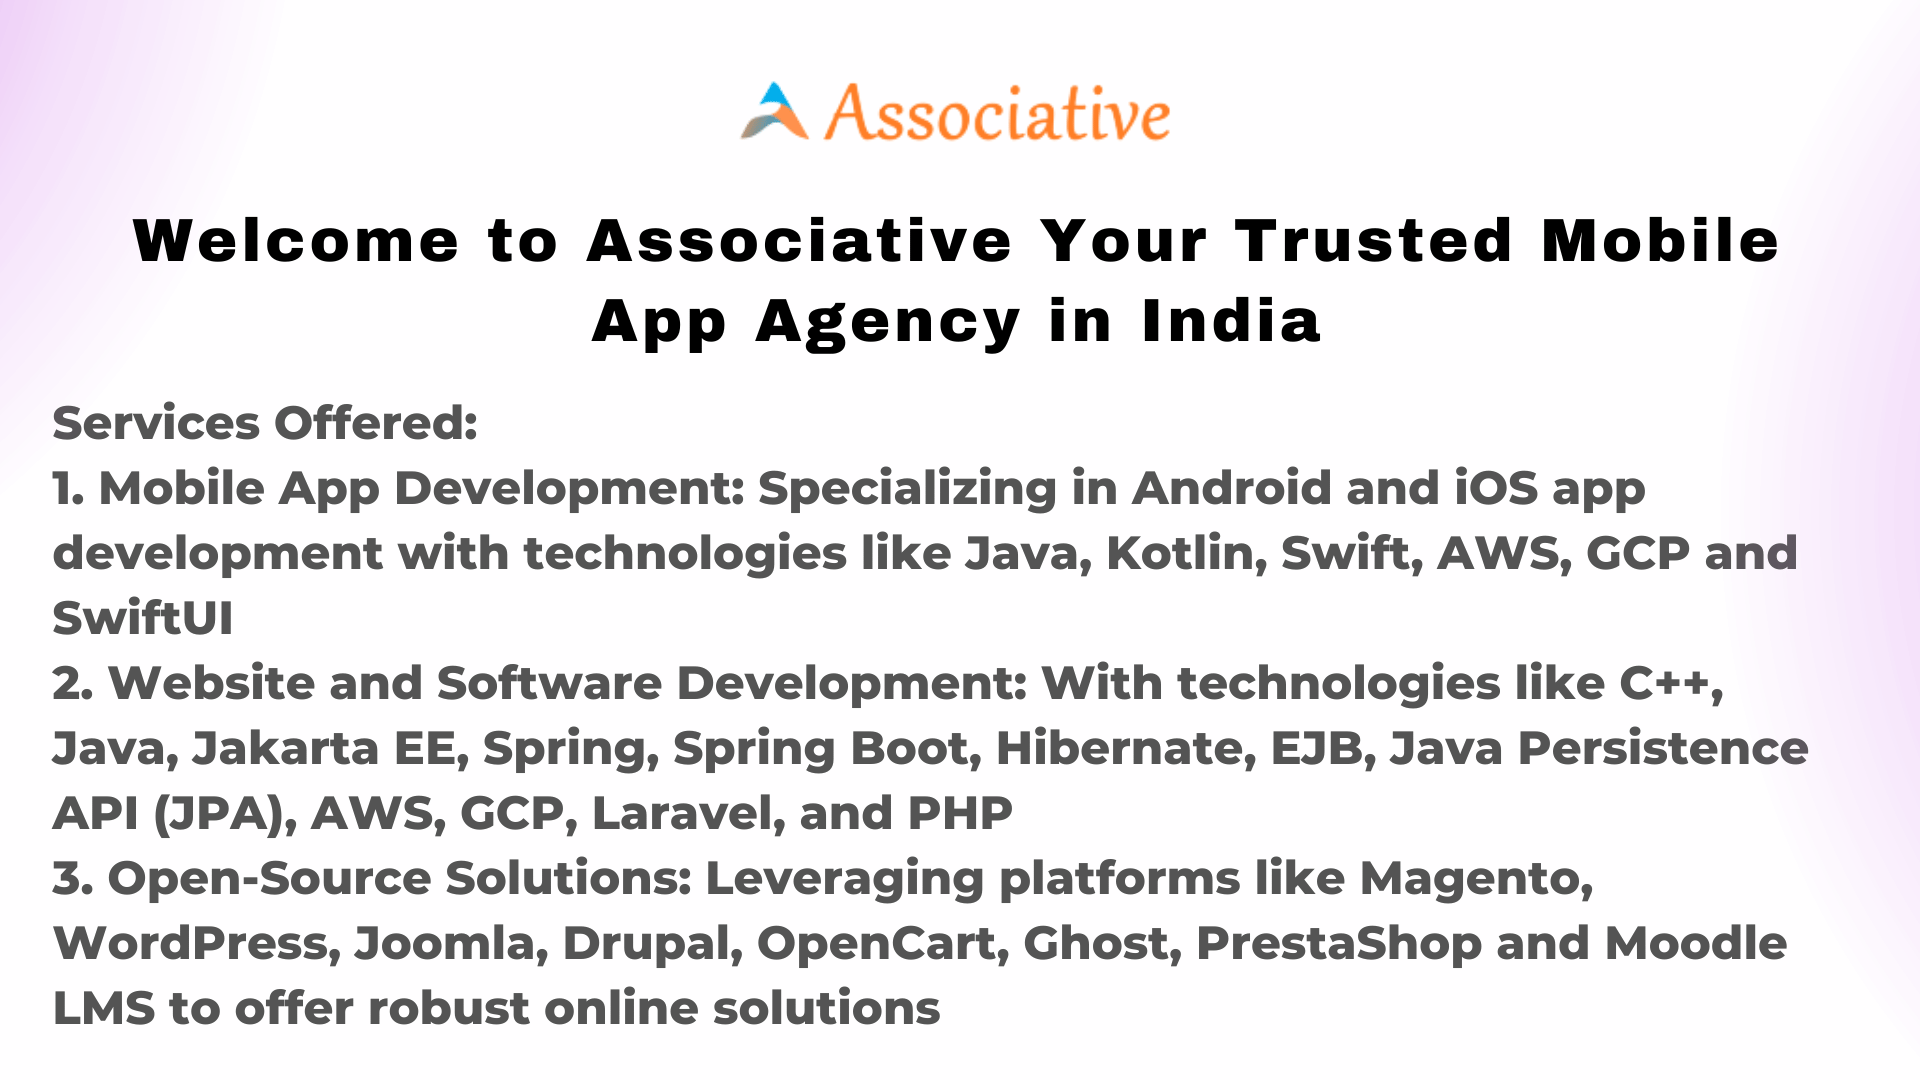 Welcome to Associative Your Trusted Mobile App Agency in India